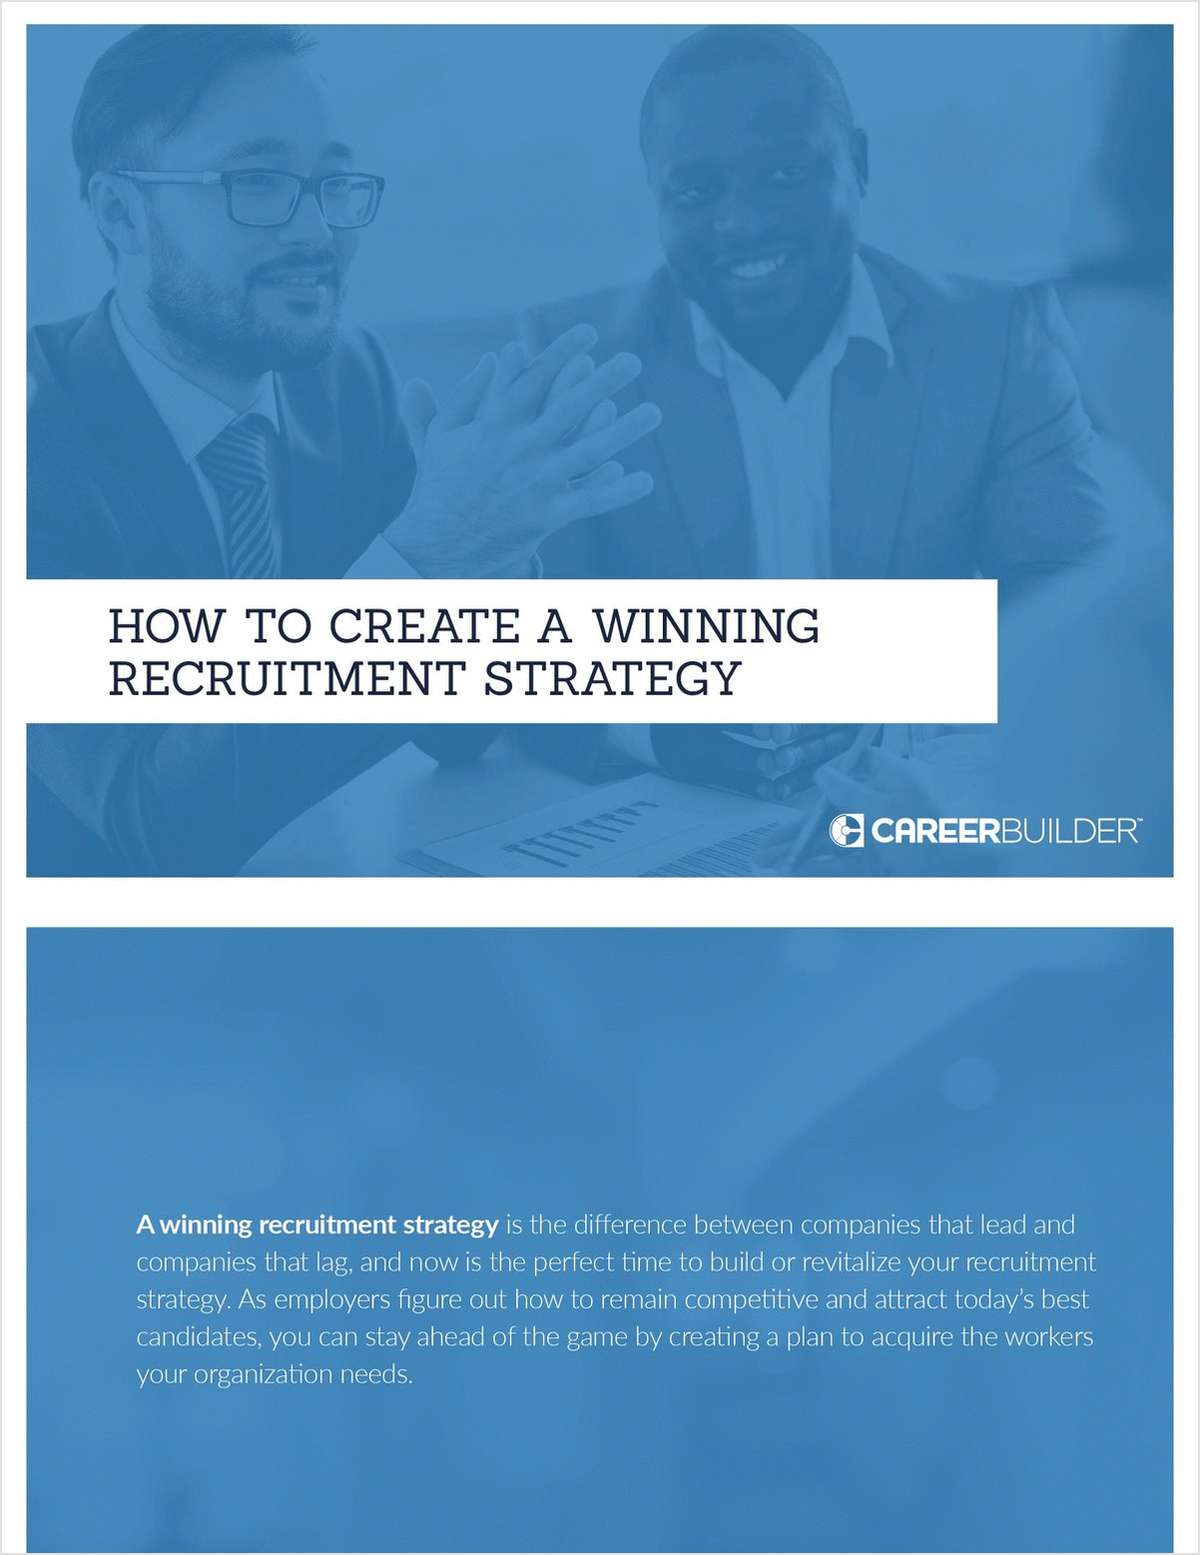 How to Create a Winning Recruitment Strategy